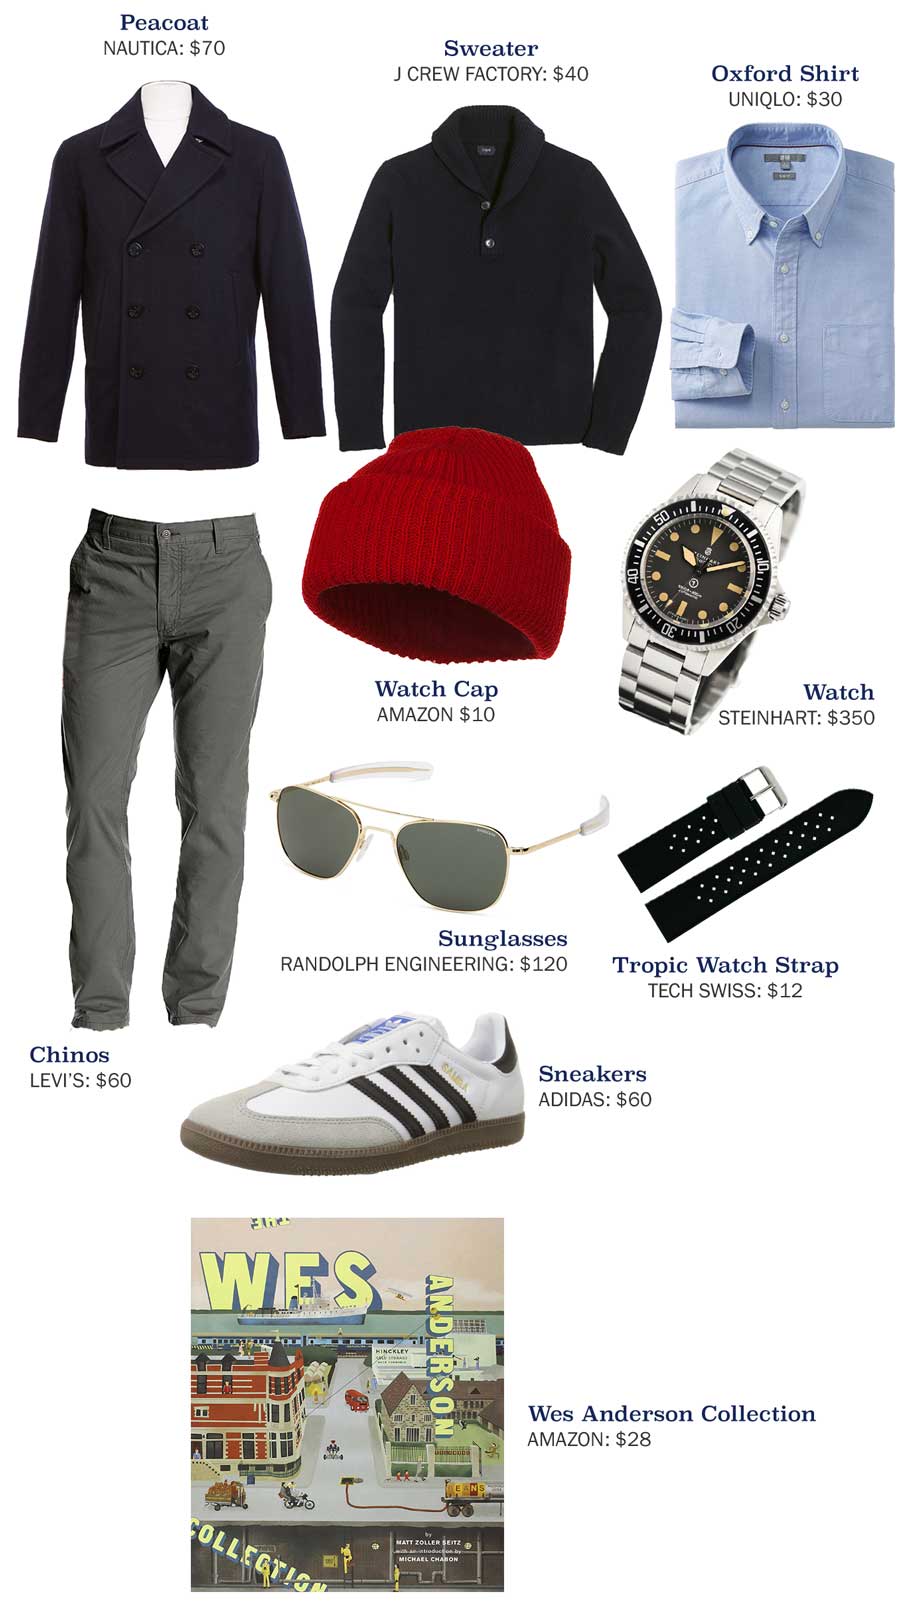 An outfit made with a red watch cap